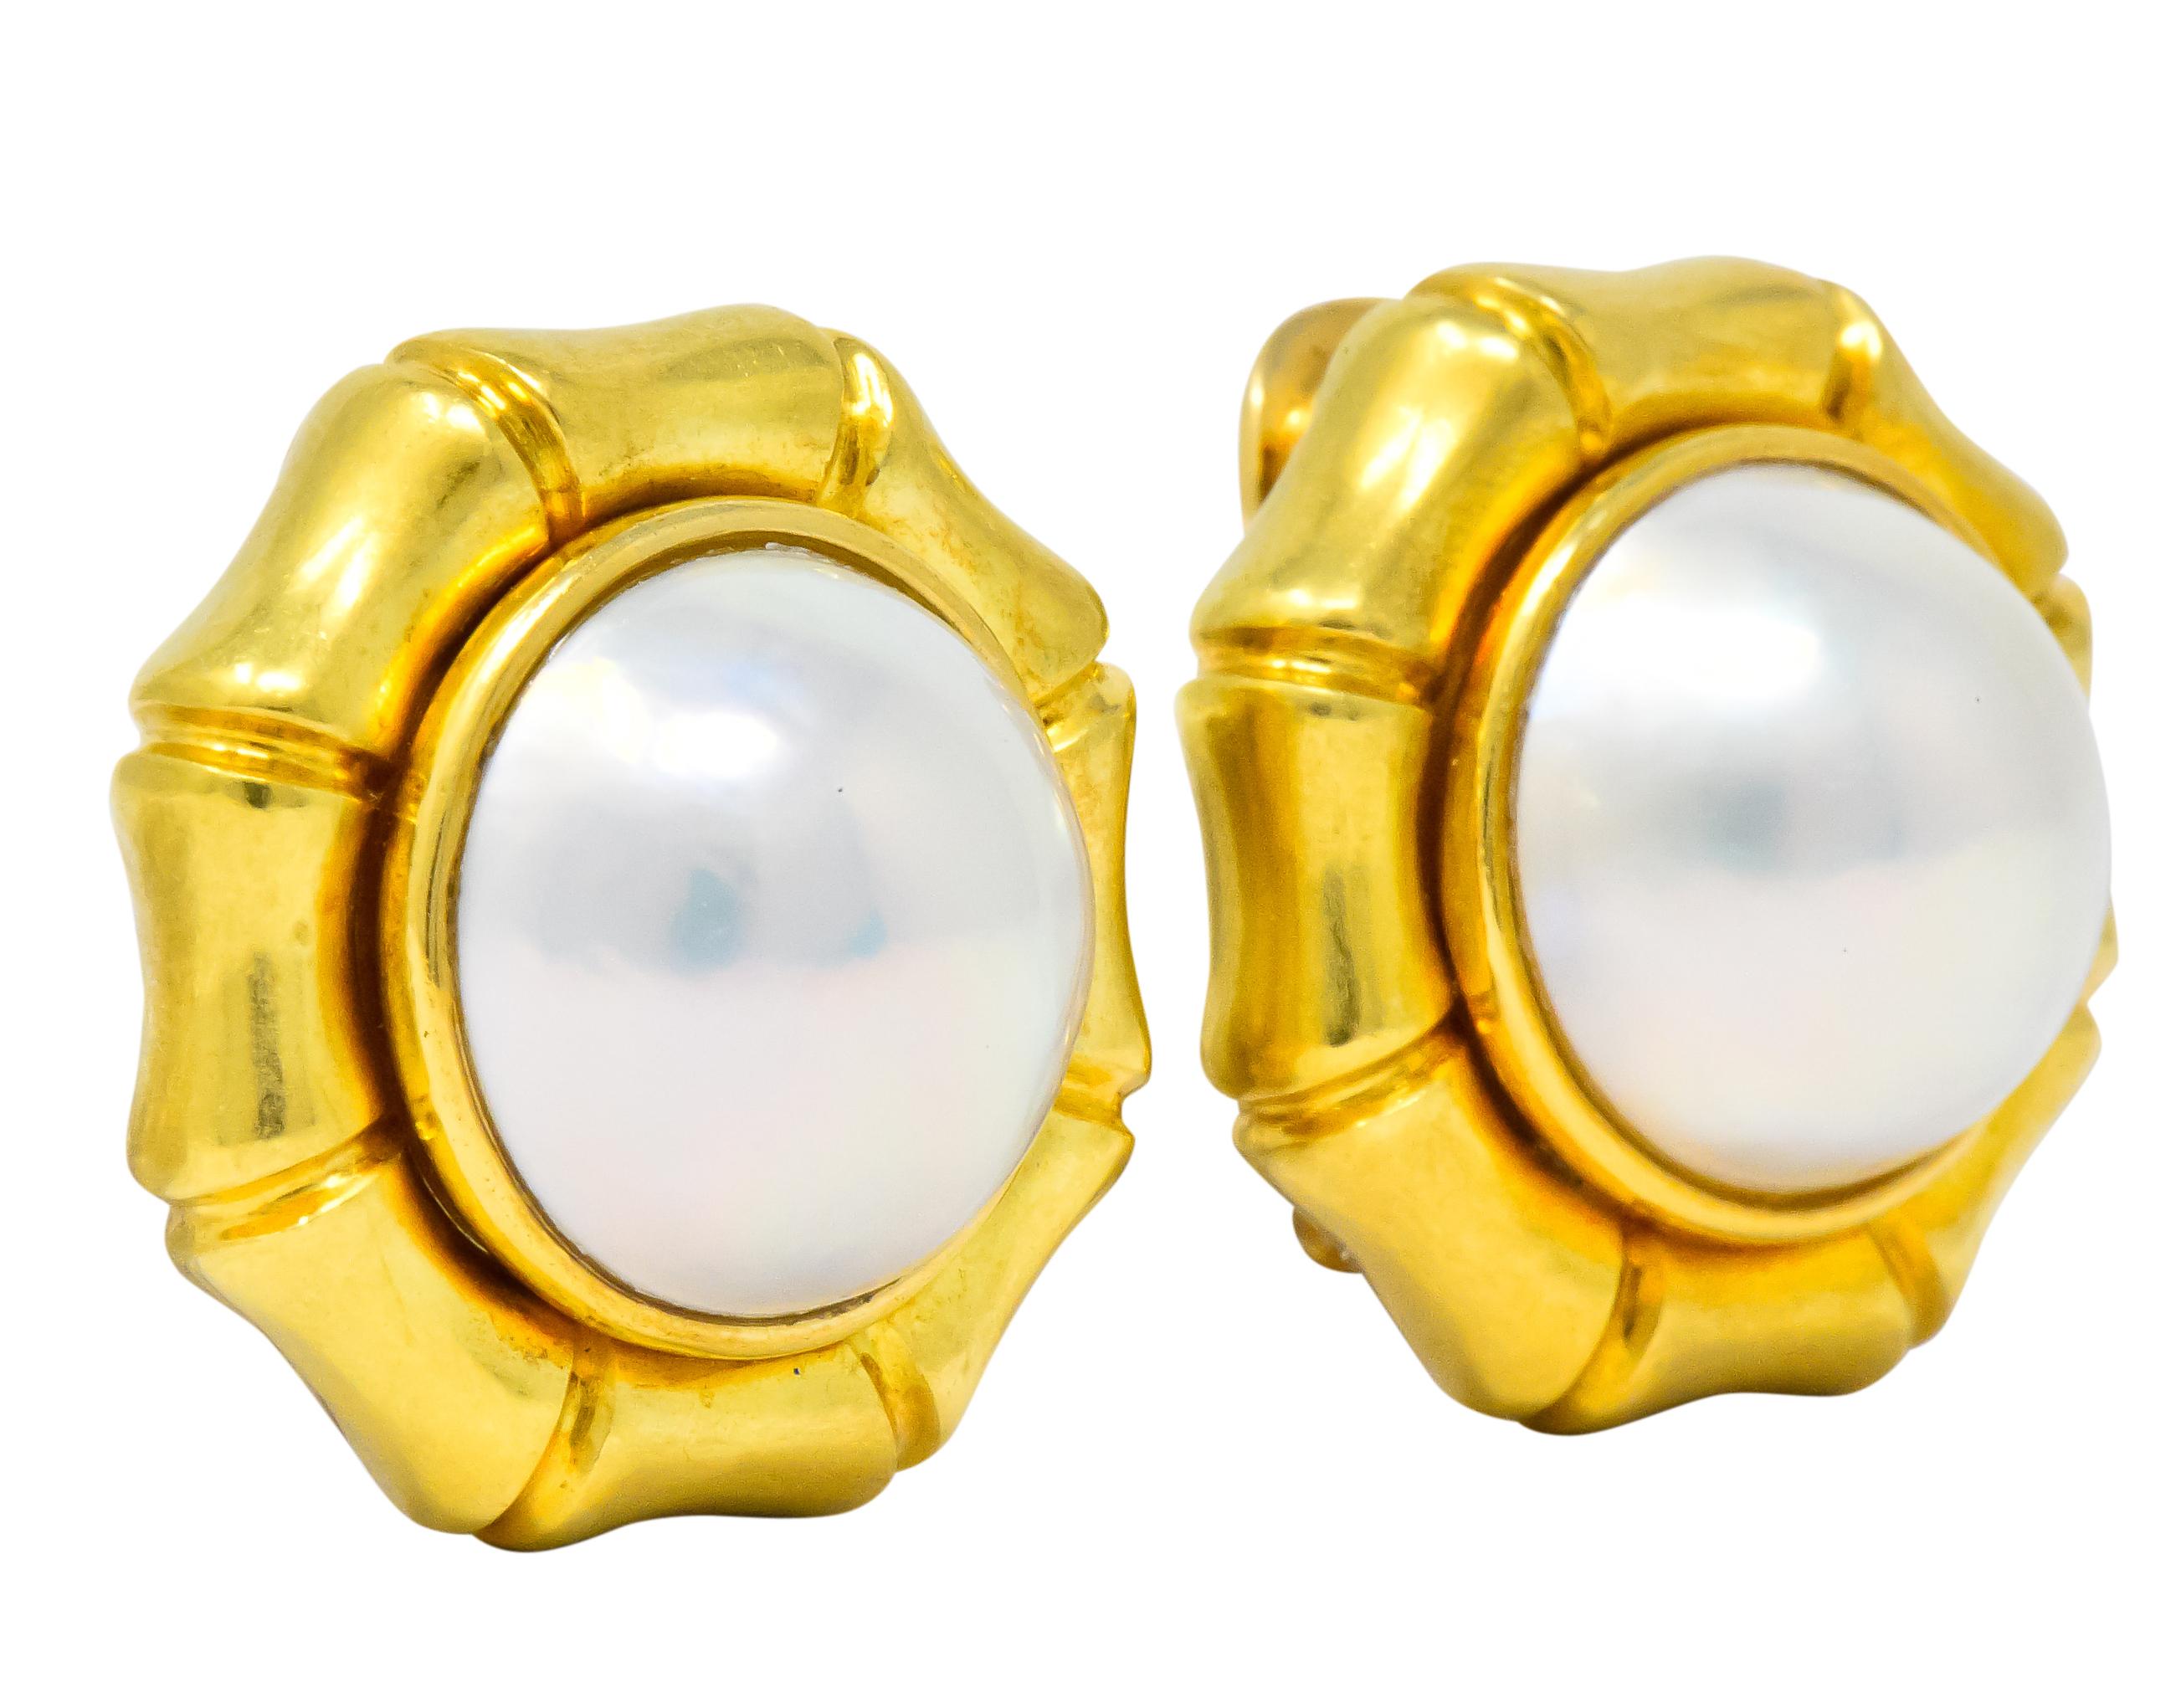 Each centering a mabe pearl measuring approximately 15.0 mm, gray body color with strong spectral overtone and very good luster

Bezel set in matte gold surround featuring a bamboo motif

Hinged omega clip-backs with optional articulated